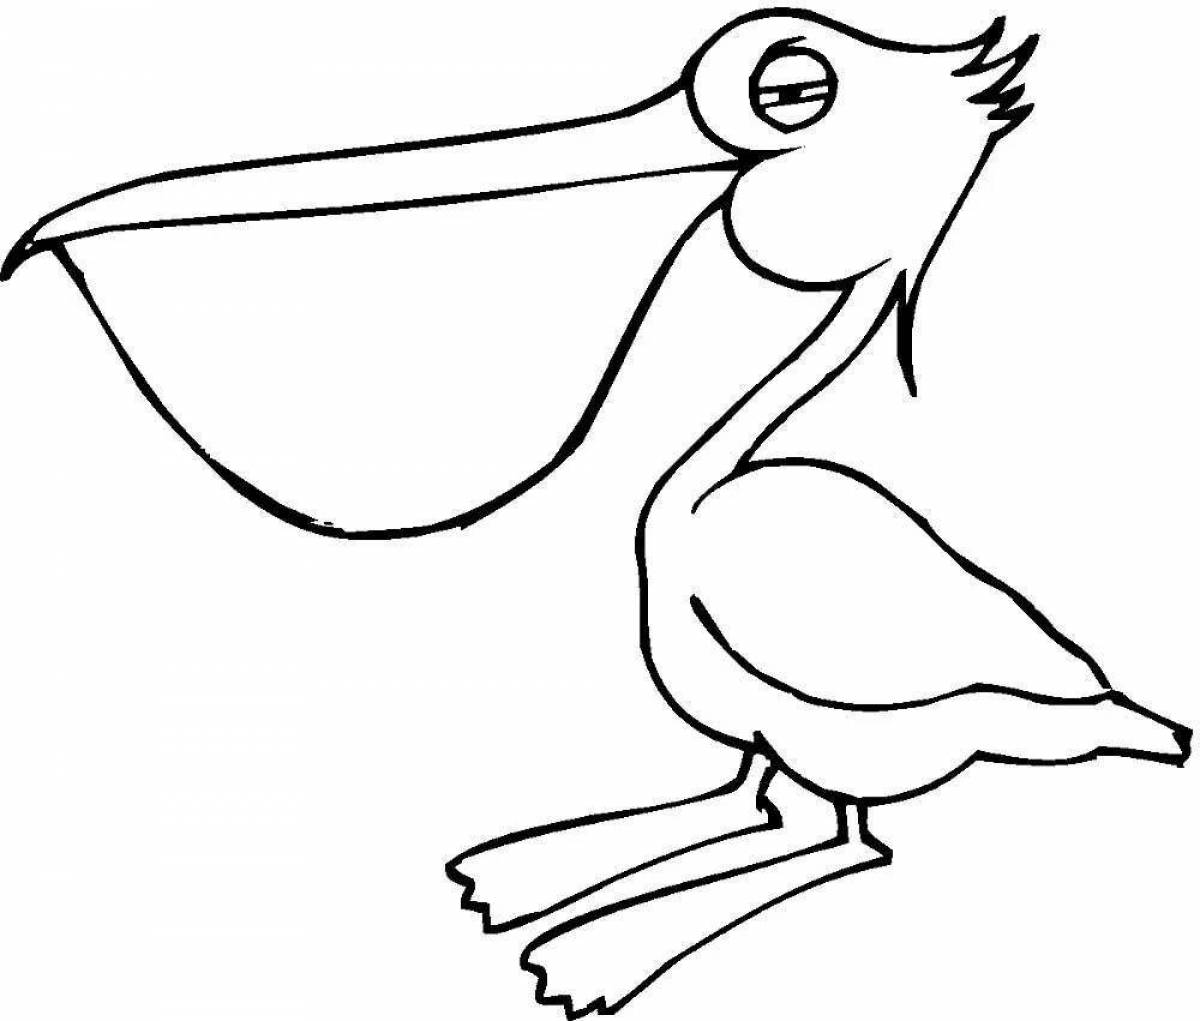 A fun pelican coloring book for the little ones